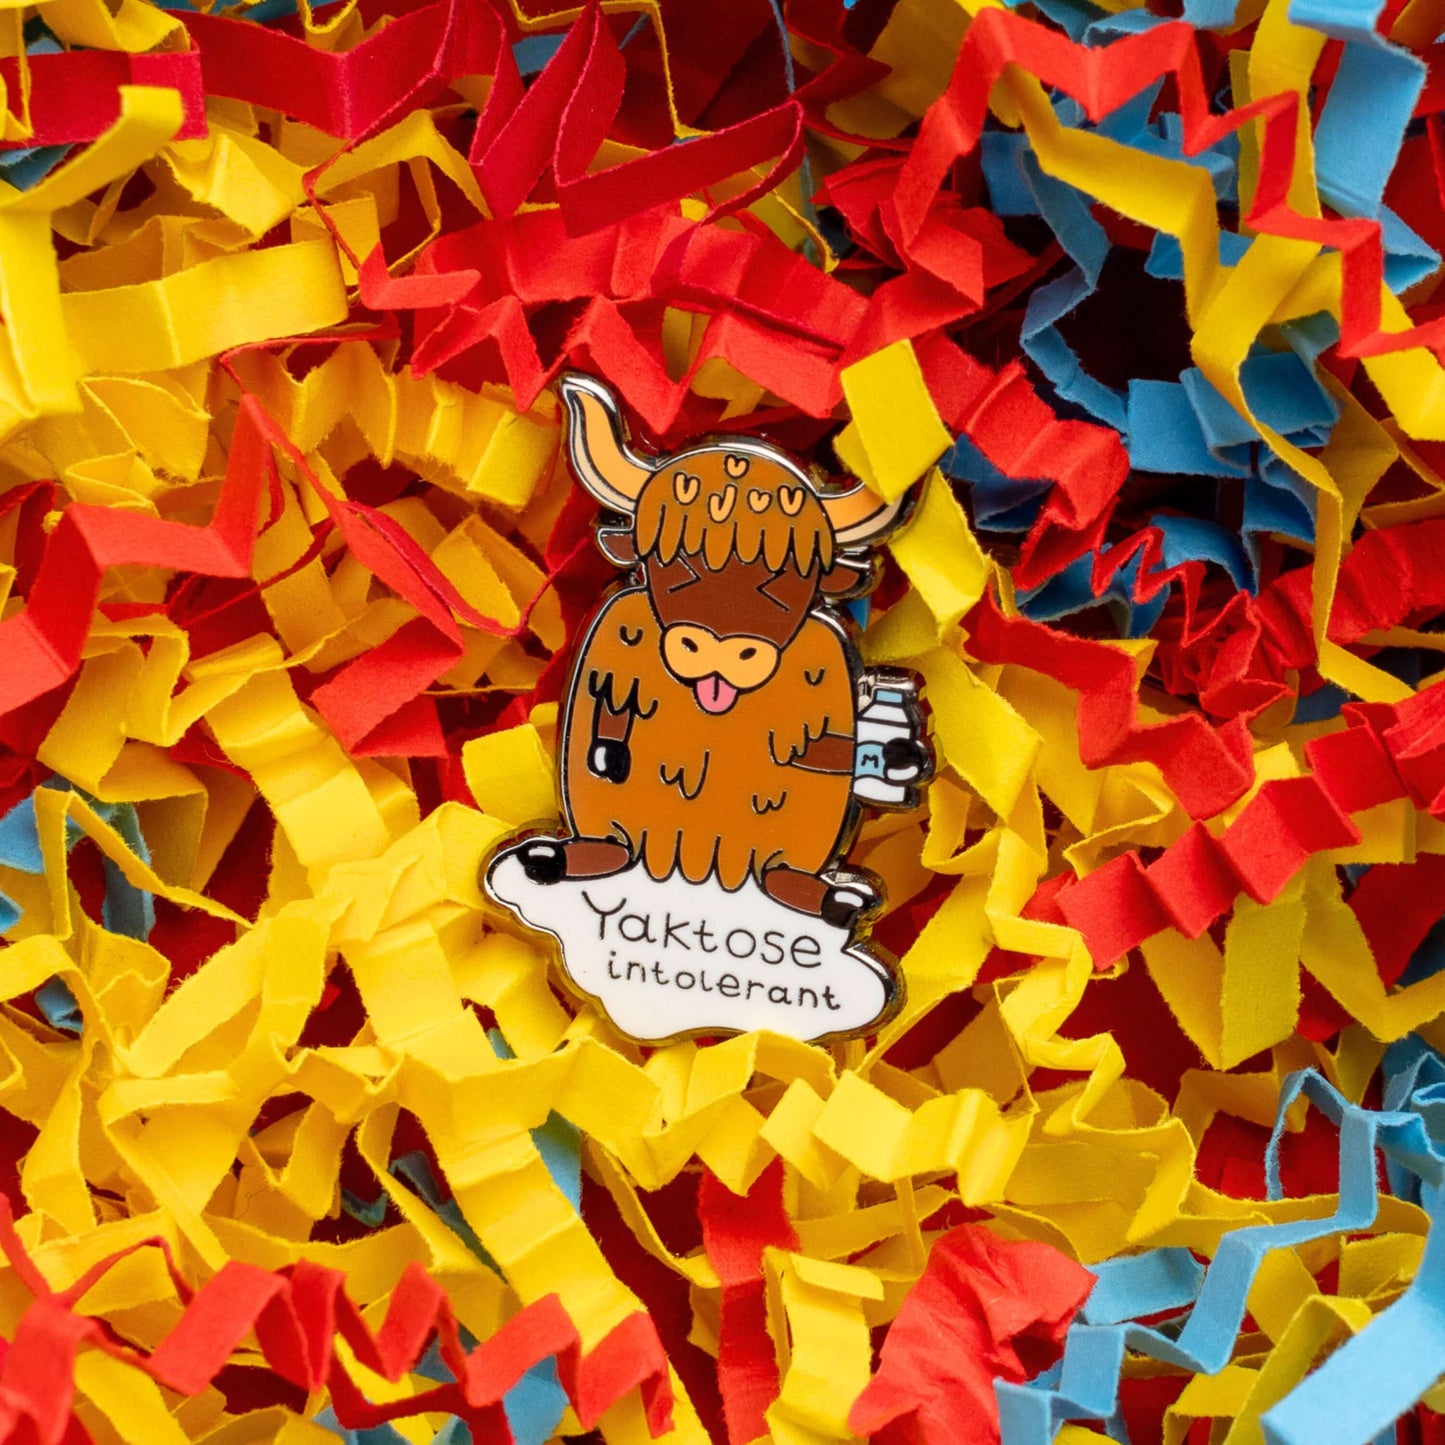 Yaktose Intolerant Enamel Pin - Lactose Intolerant on a blue, red and yellow crinkle card confetti background. The enamel pin is a yak sat holding a bottle of milk with it's tongue out looking disgusted. There is a puddle of milk under the yak with black text that reads 'yaktose intolerant'. The hand drawn design is made to raise awareness for lactose intolerance.